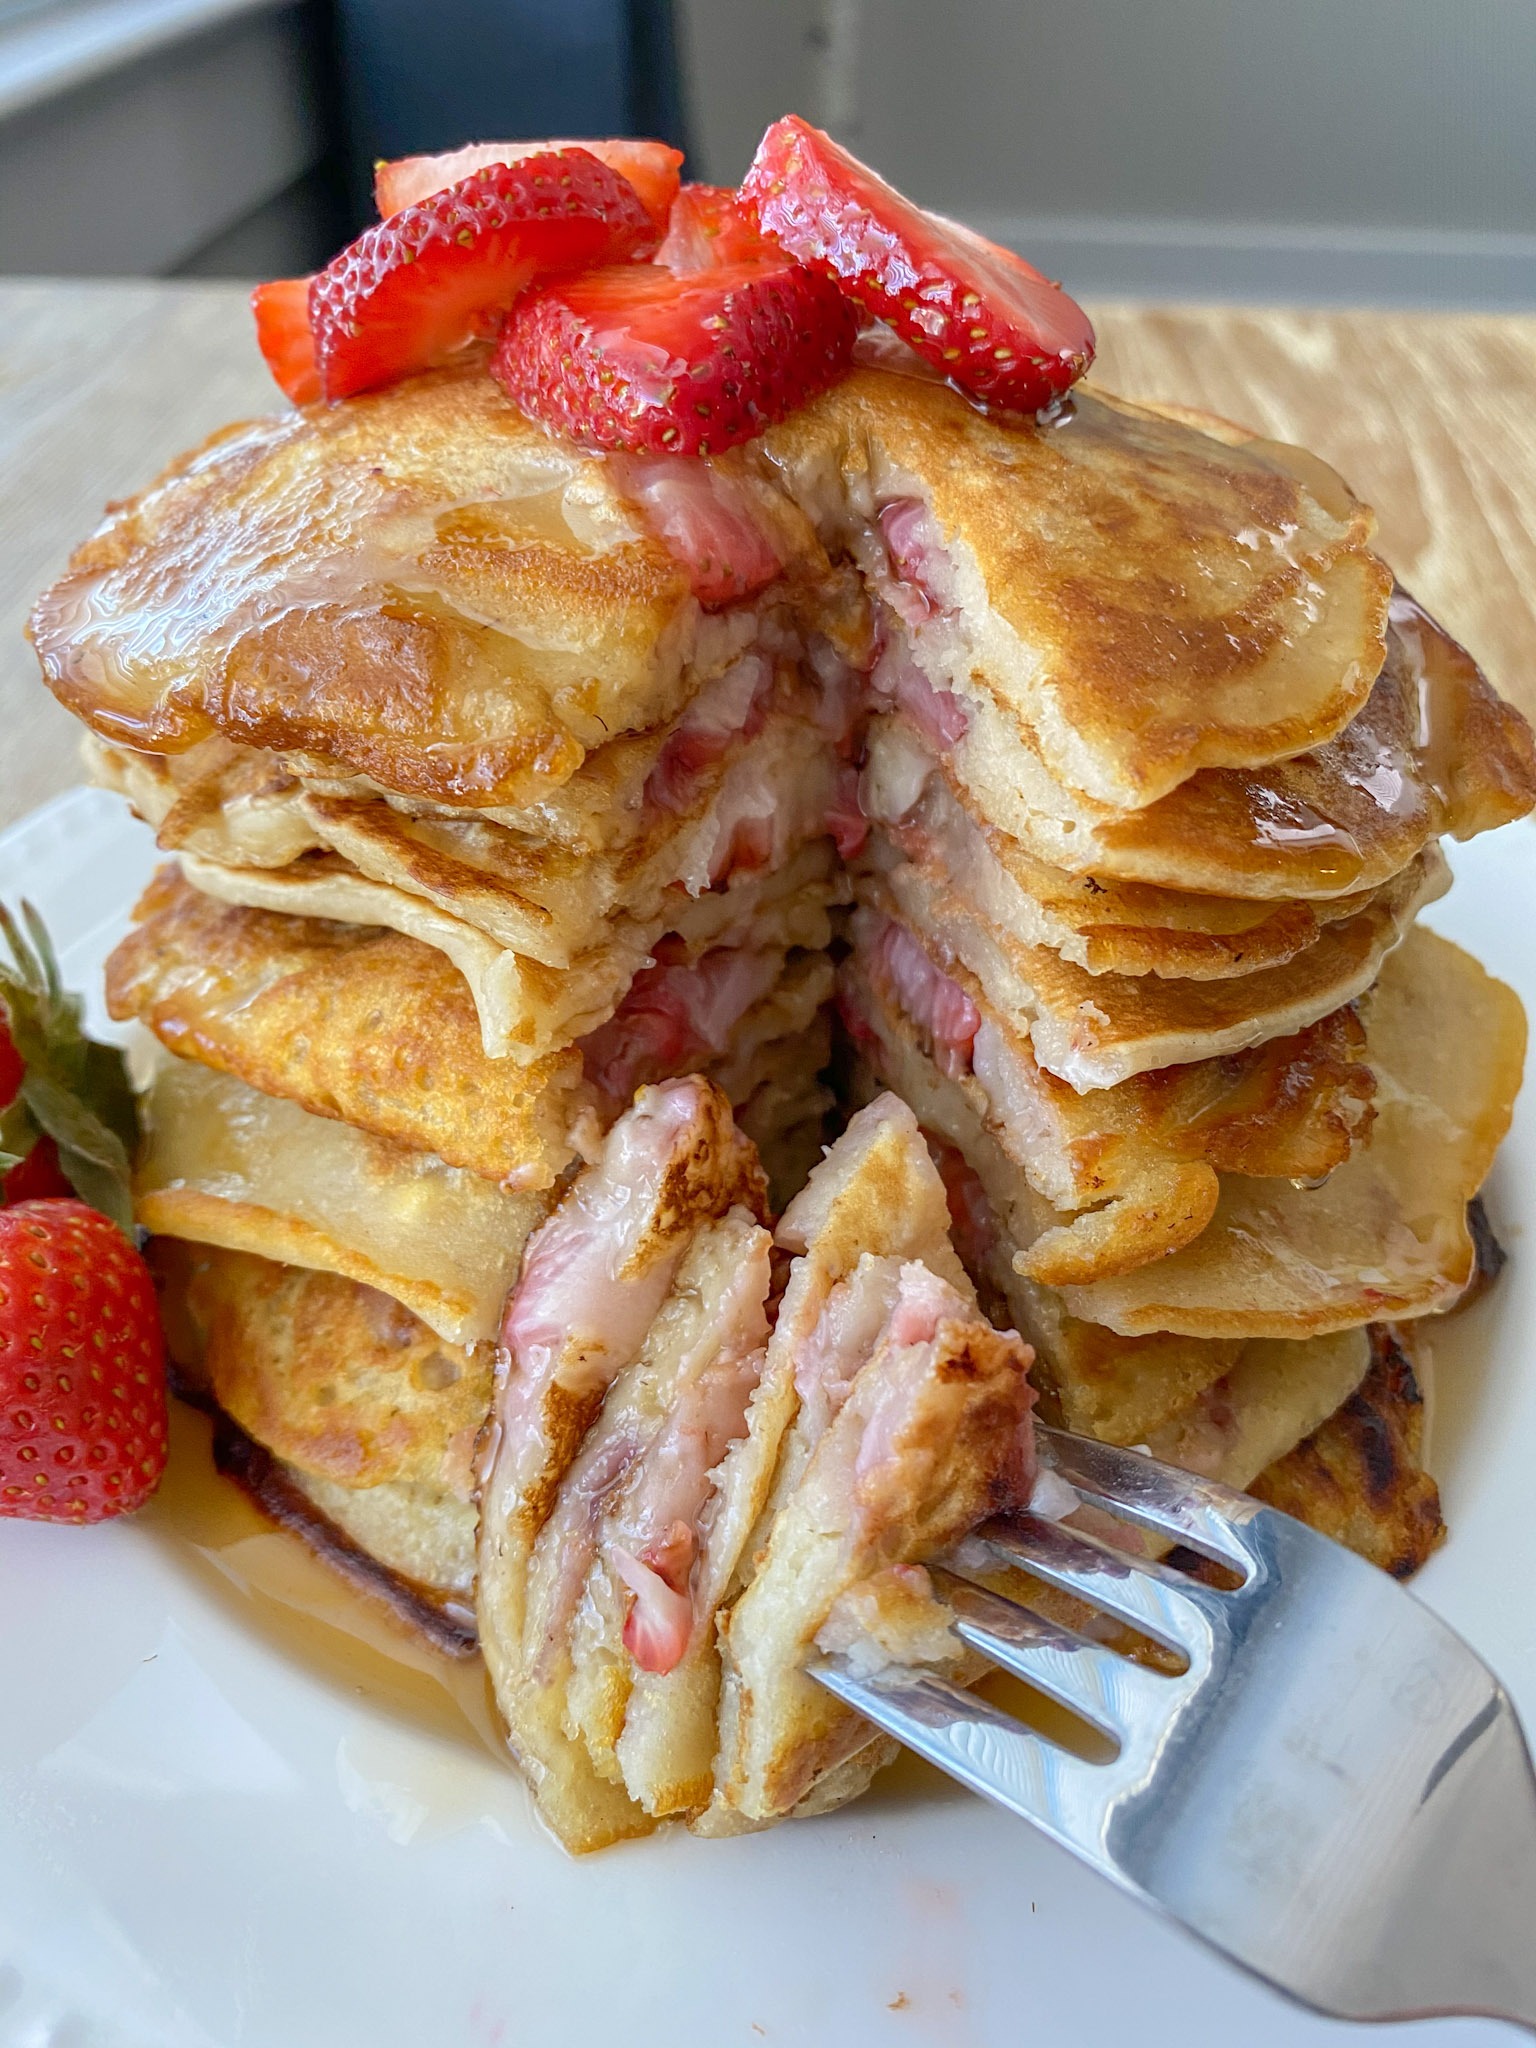 A large stack of strawberry pancakes with some on a fork.